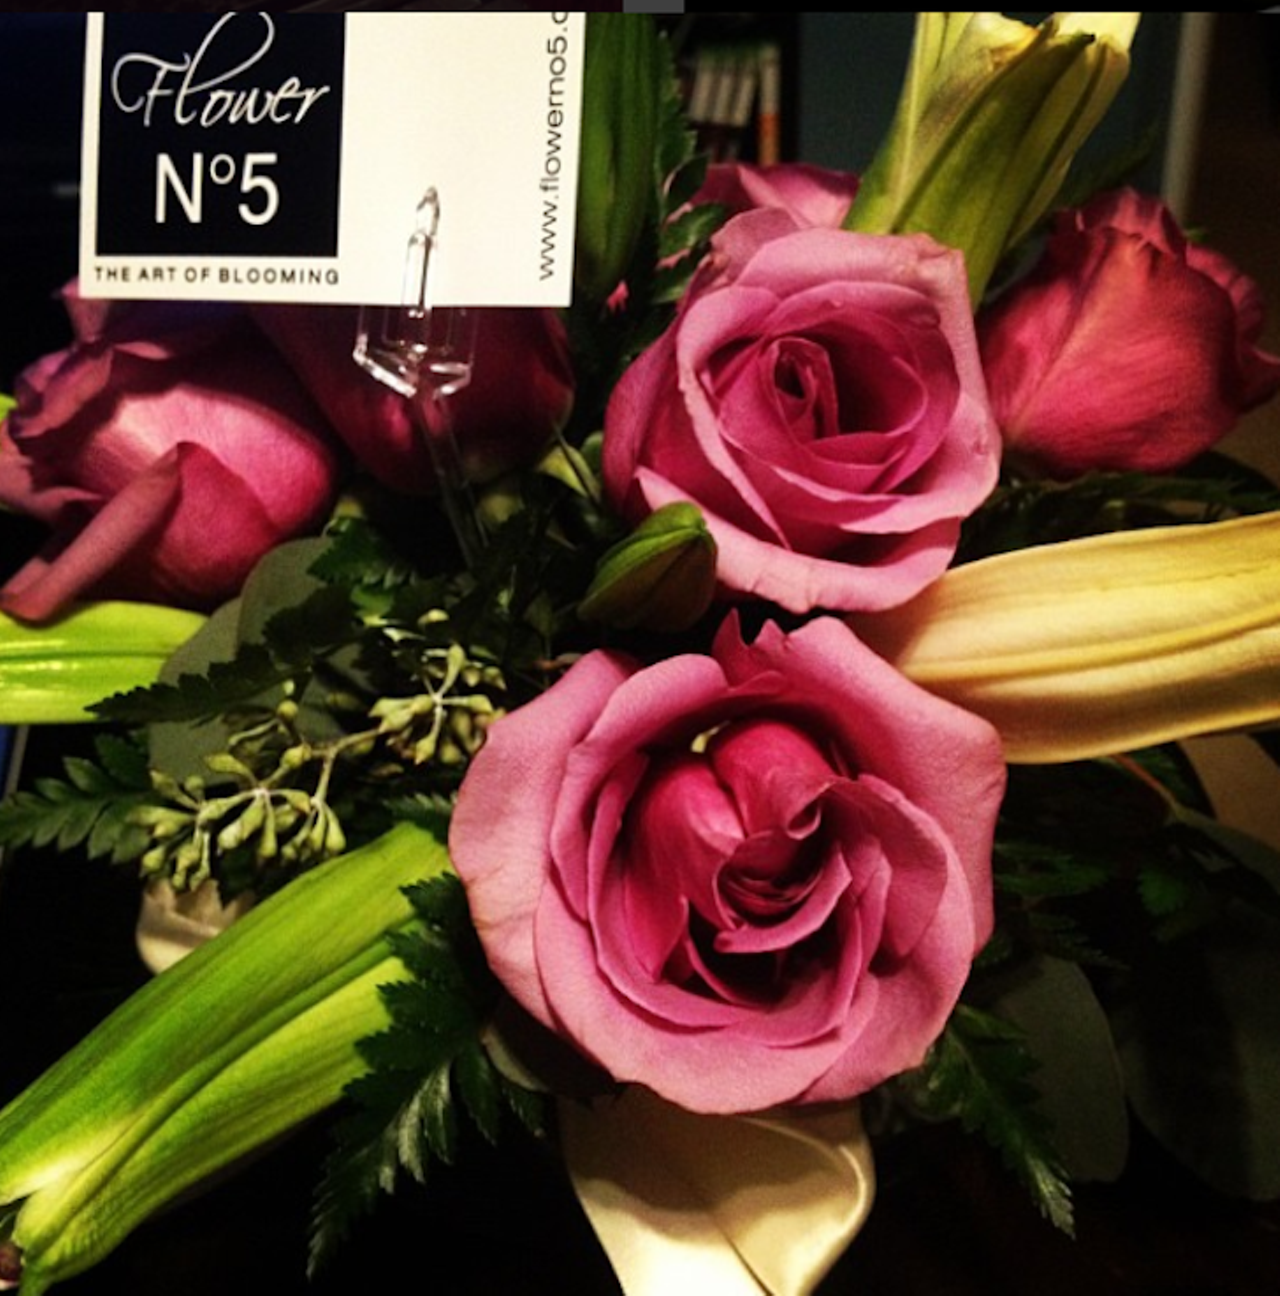 Flower No. 5
1807 E. Winter Park Road | 407-960-5885
Floral arrangements are taken to a whole new level at Flower No. 5. Even if you don&#146;t need a bouquet, it sure is nice to just take a minute and smell the roses.
Photo via norman_yu/Instagram